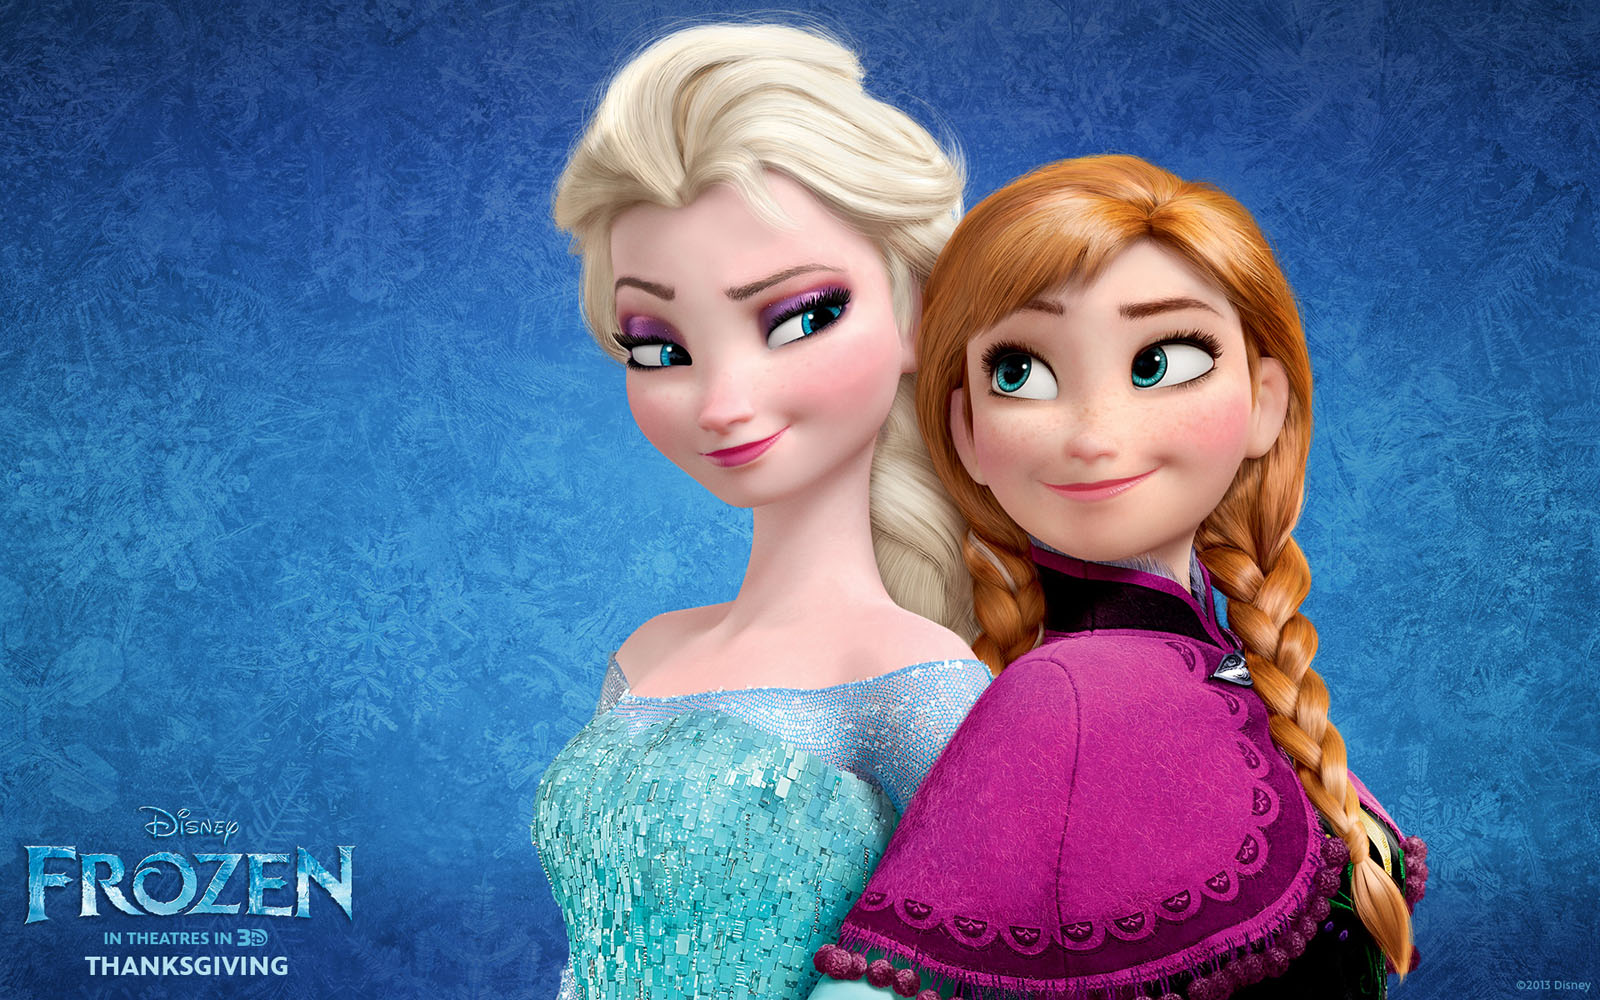 Disney Frozen - 25 Character designs, Wallpapers and Trailers from latest  animation movie